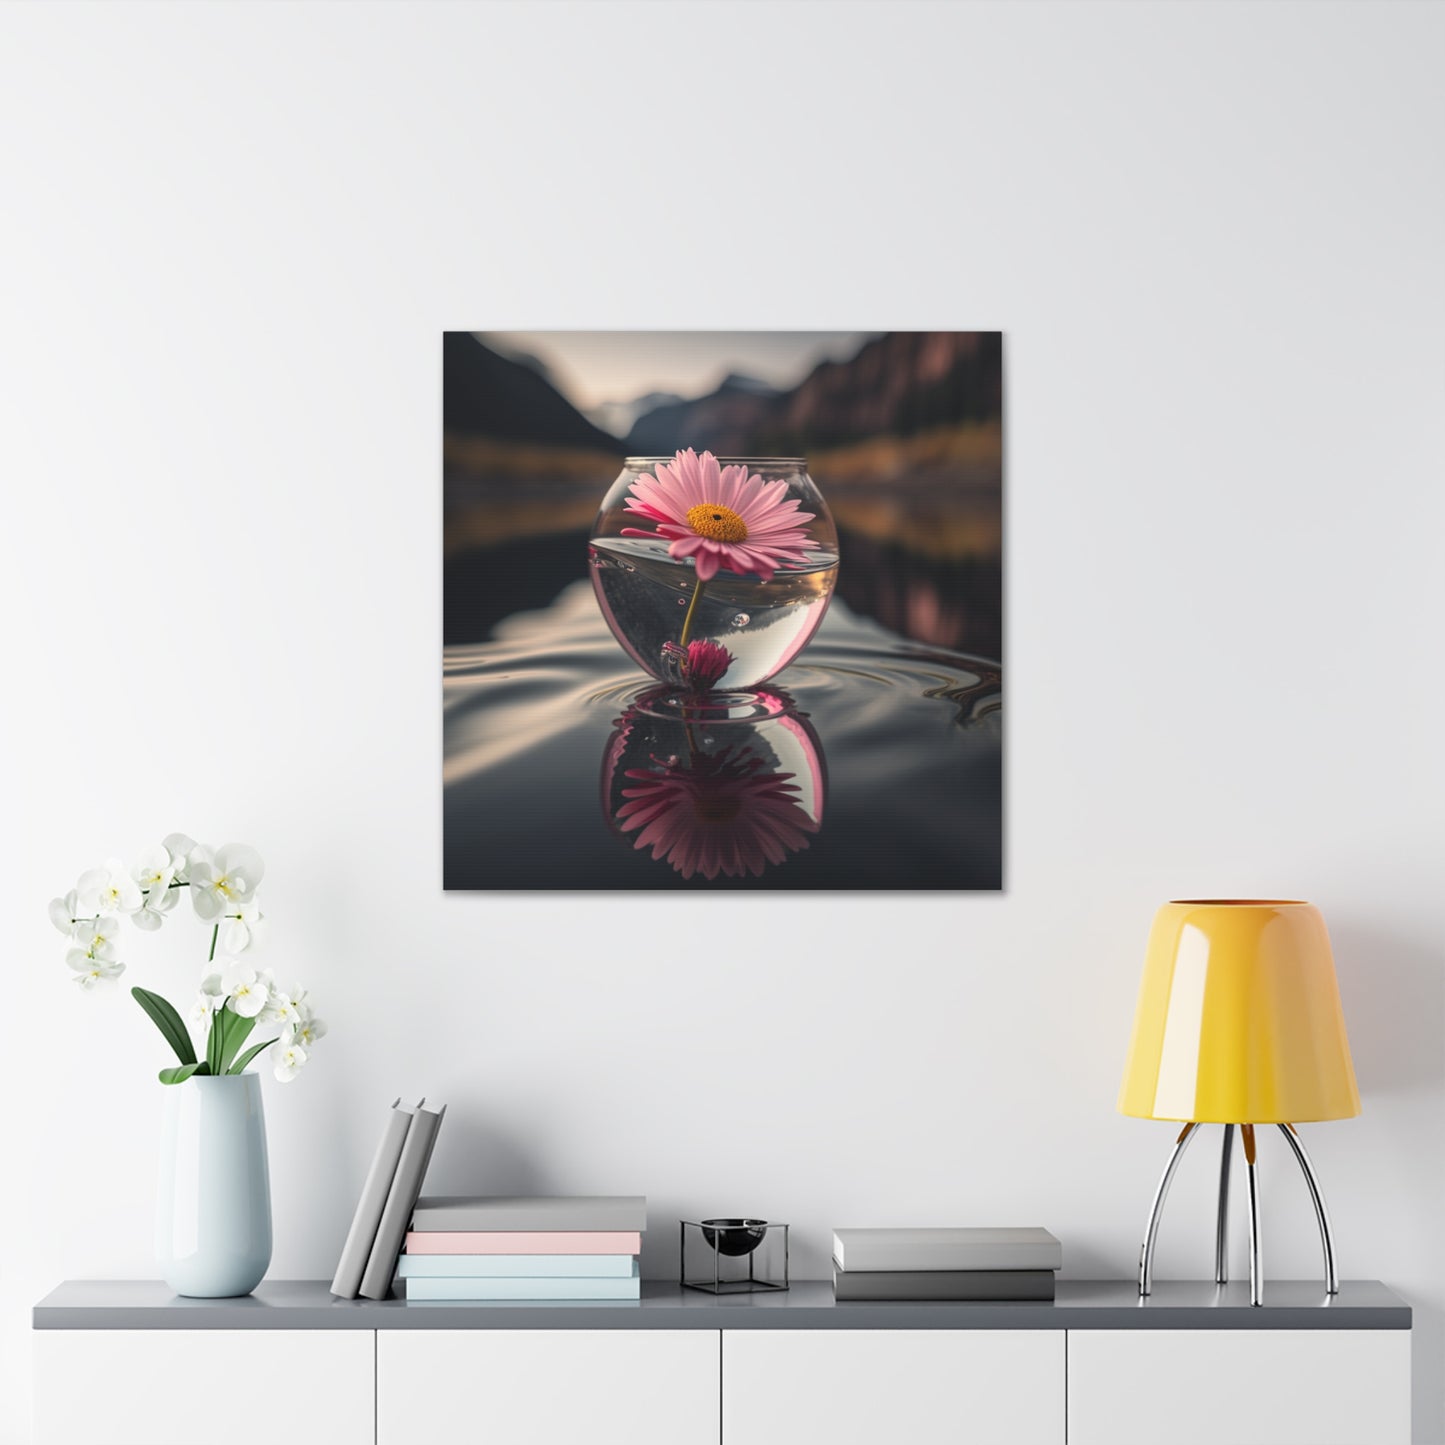 Canvas Gallery Wraps Daisy in a vase 3